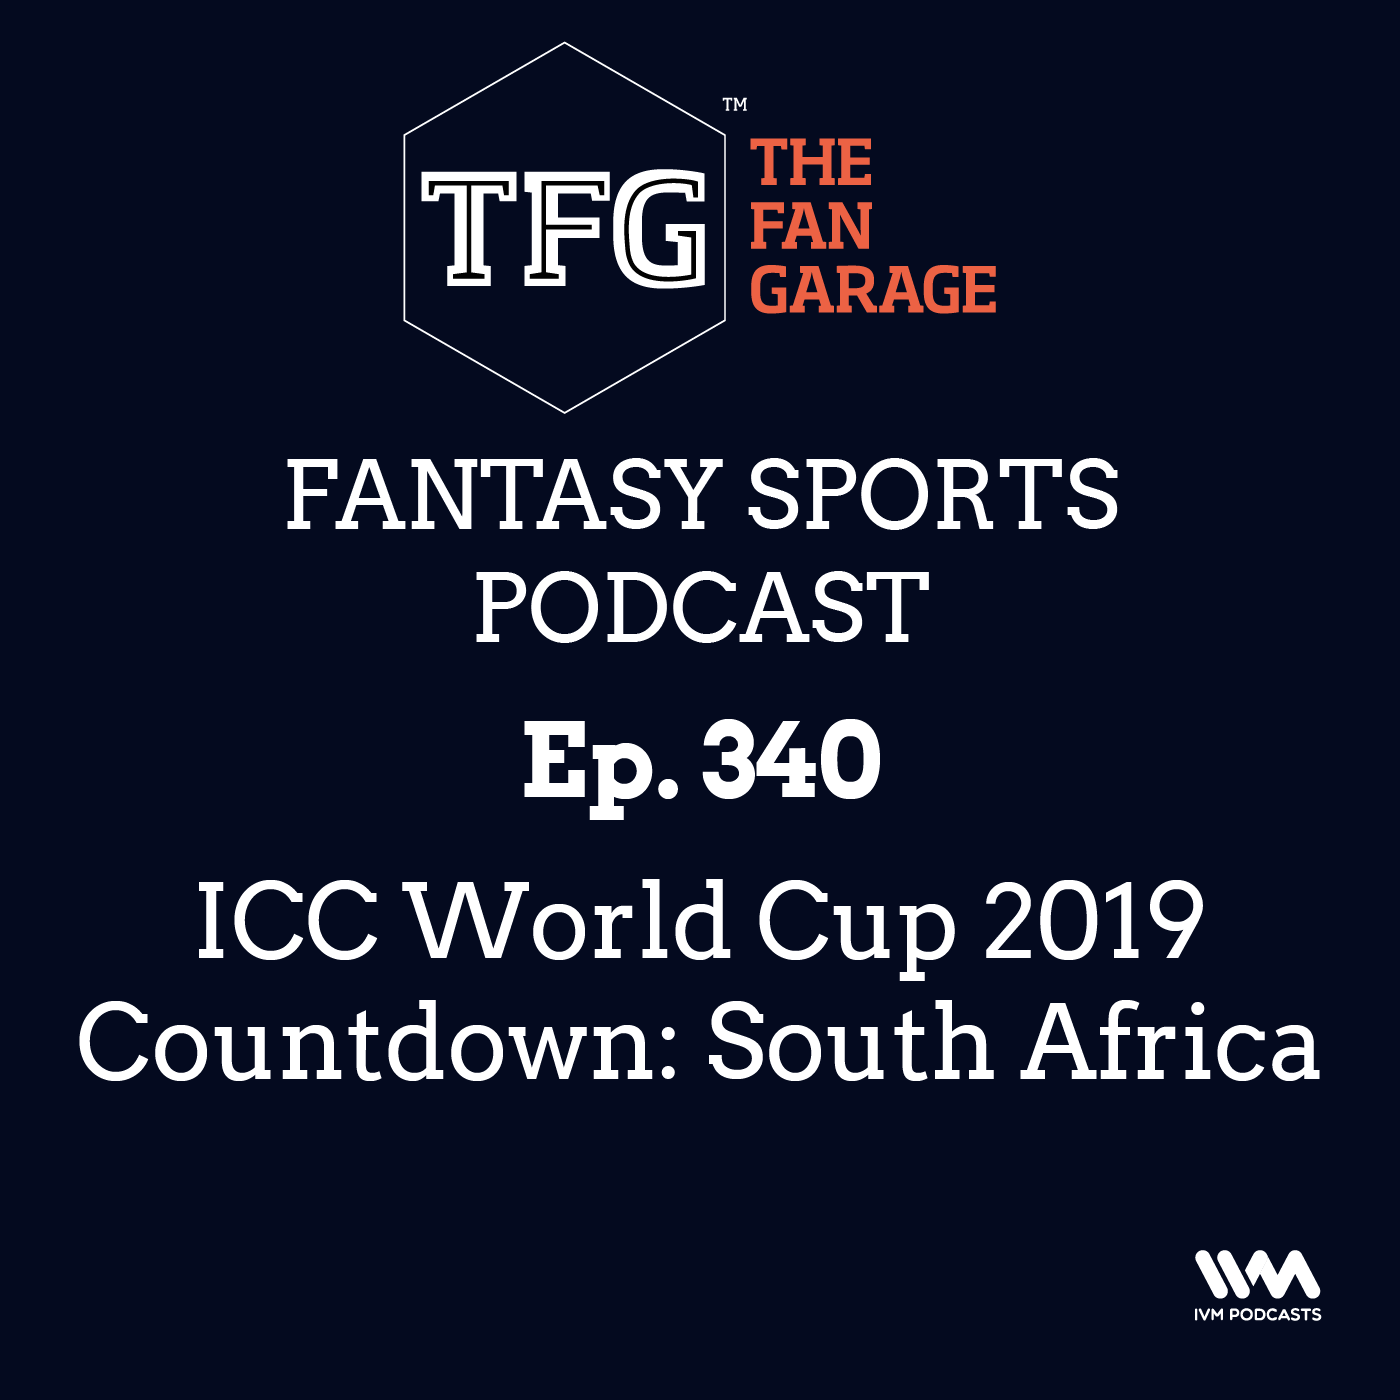 TFG Fantasy Sports Podcast Ep. 340: ICC World Cup 2019 Countdown: South Africa